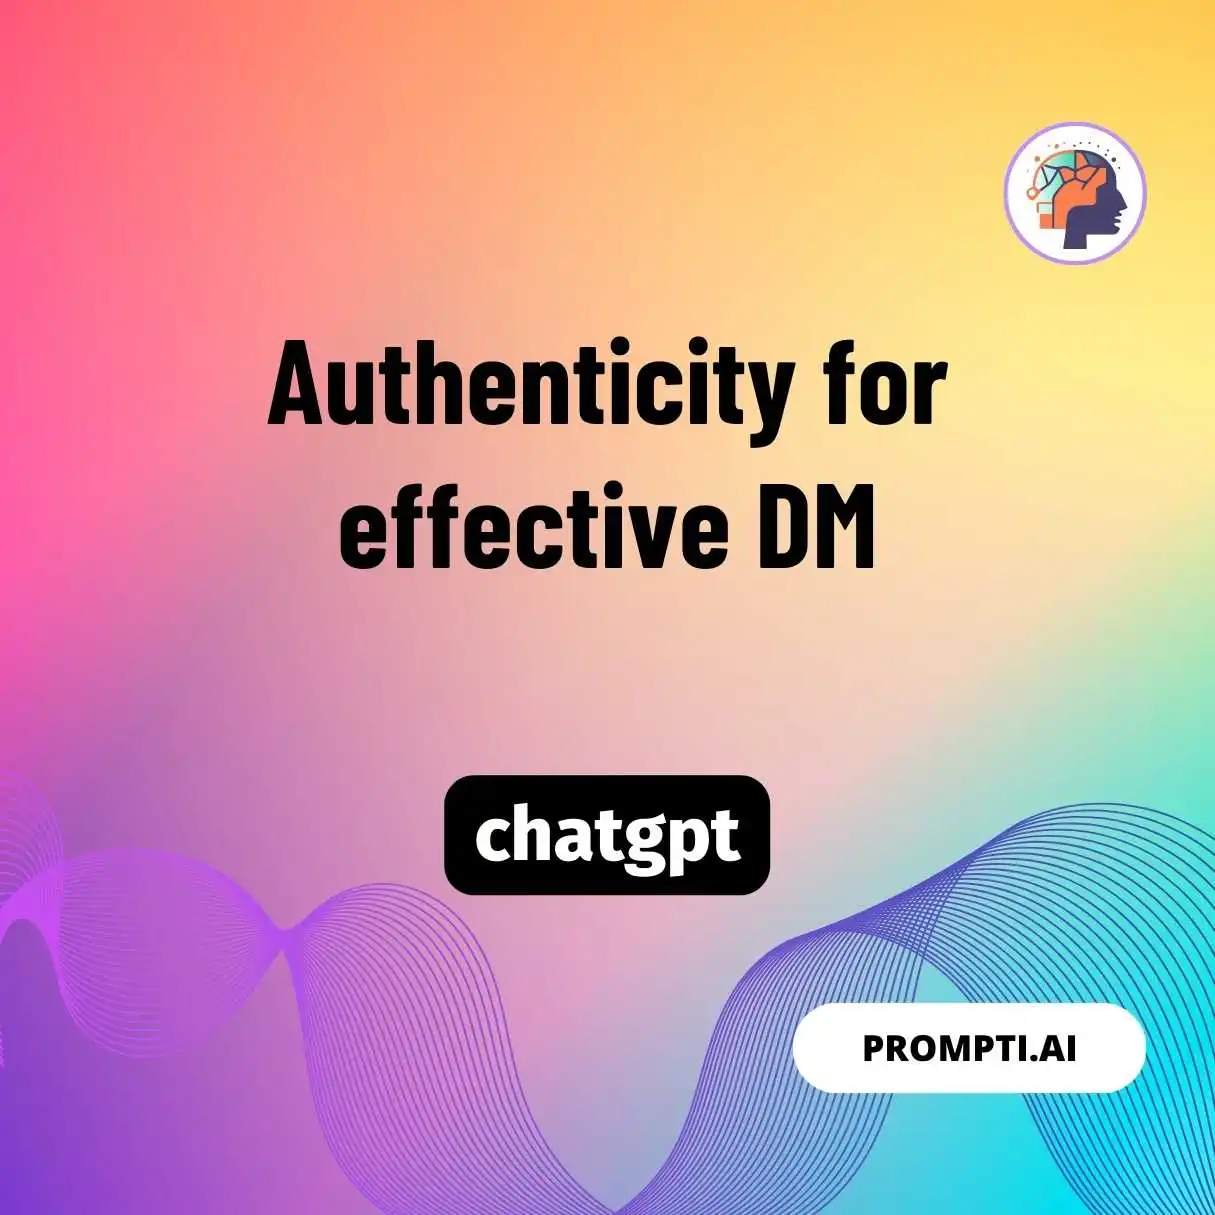 Authenticity for effective DM